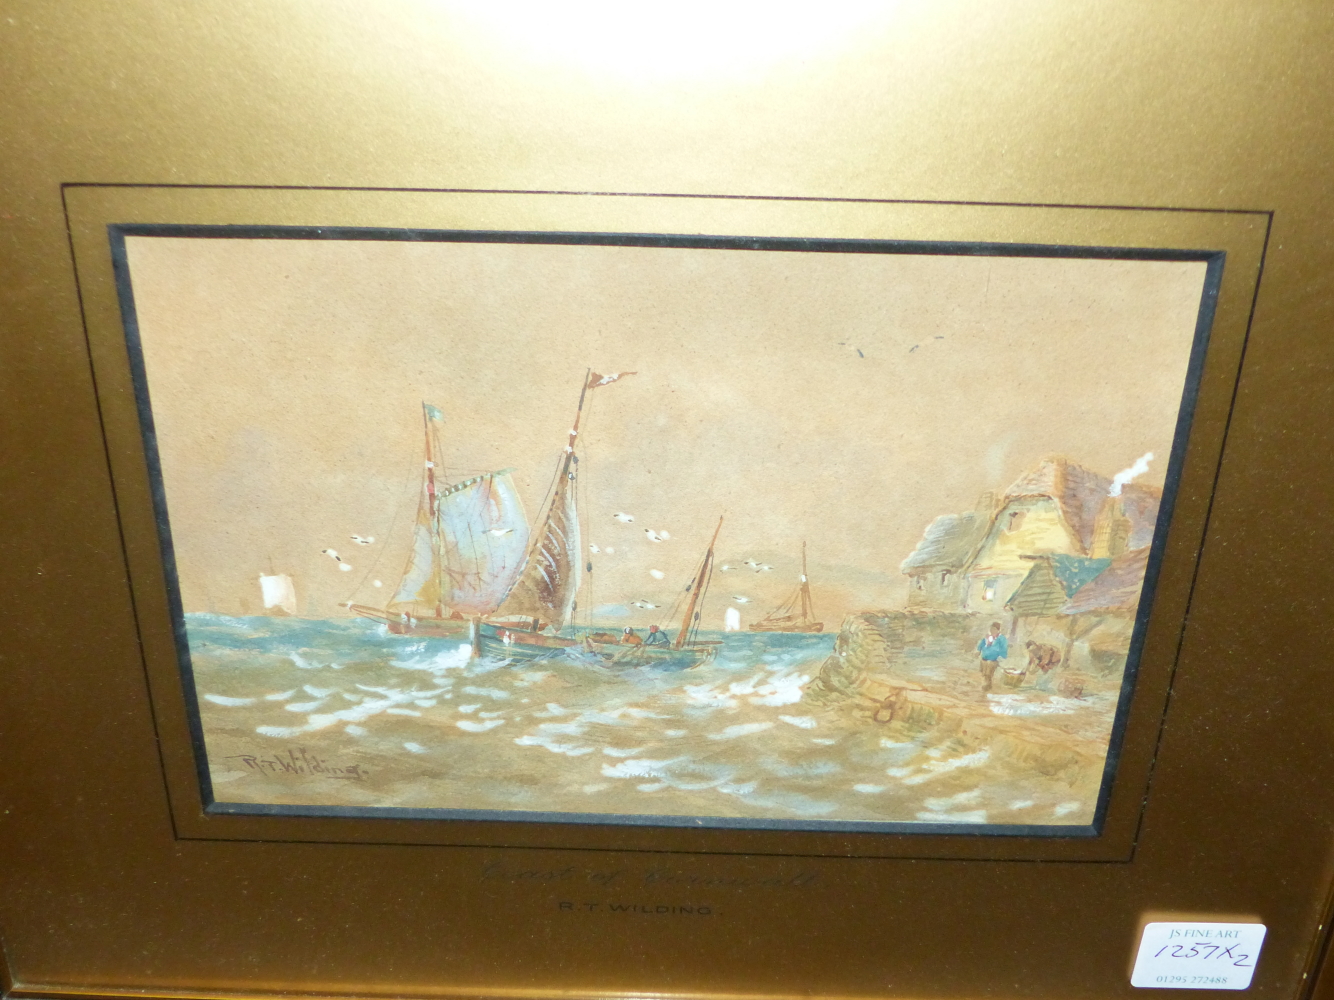 R. T. WILDING (19th/20th.C.) NEAR EXMOUTH, AND COAST OF CORNWALL, SIGNED, TWO WATERCOLOURS. 14 x - Image 6 of 8